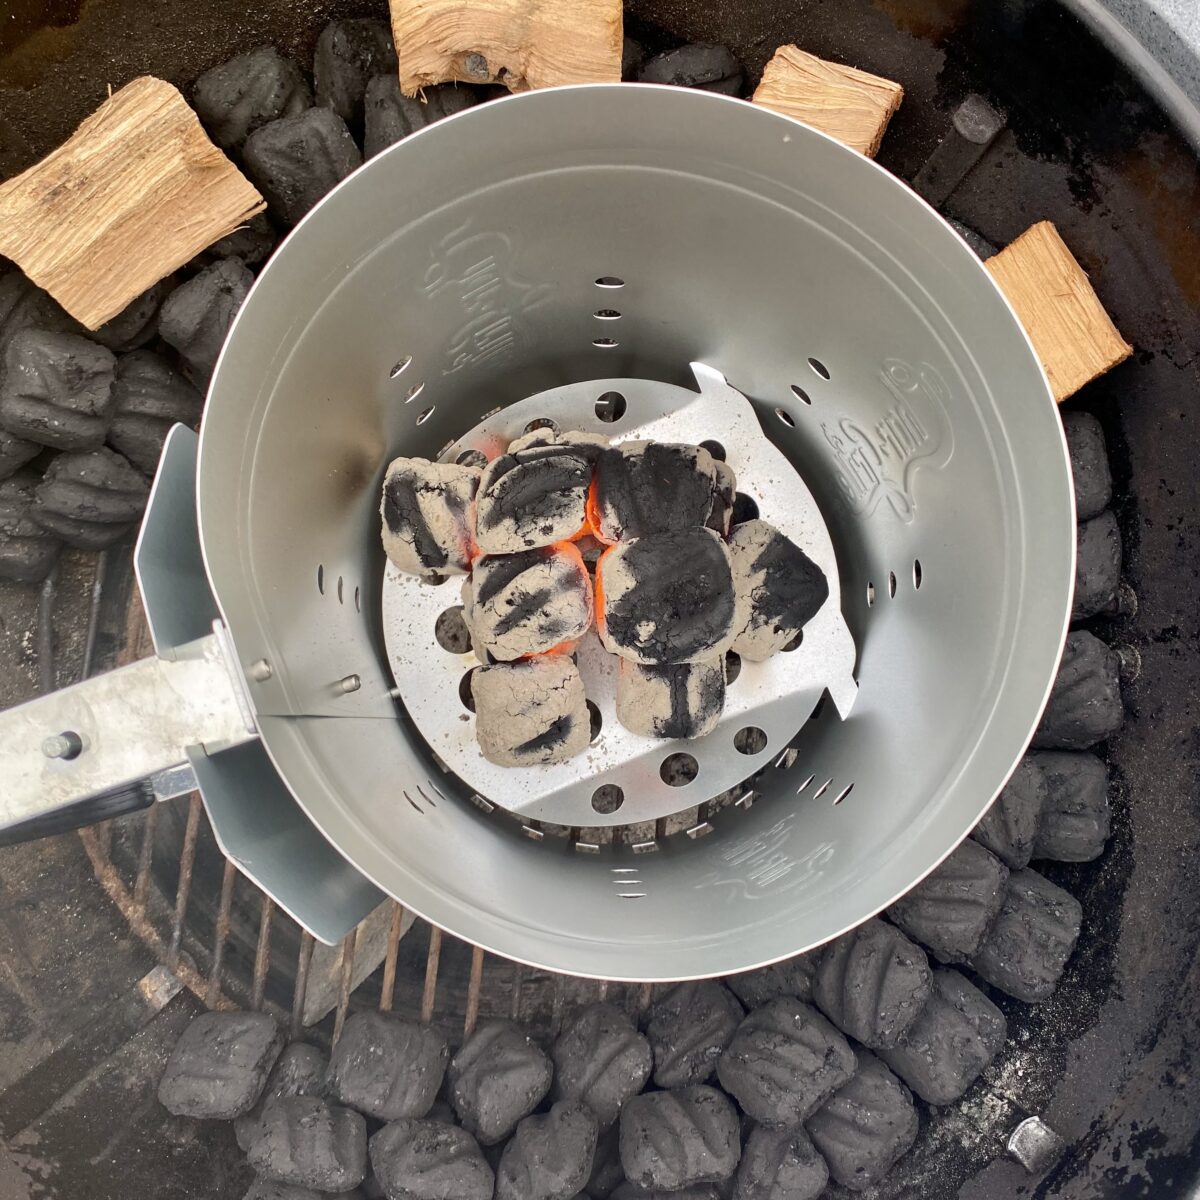 Overhead view showing 12 hot coals in a chimney starter that are ready to be placed at the head of the snake of unlit coals.